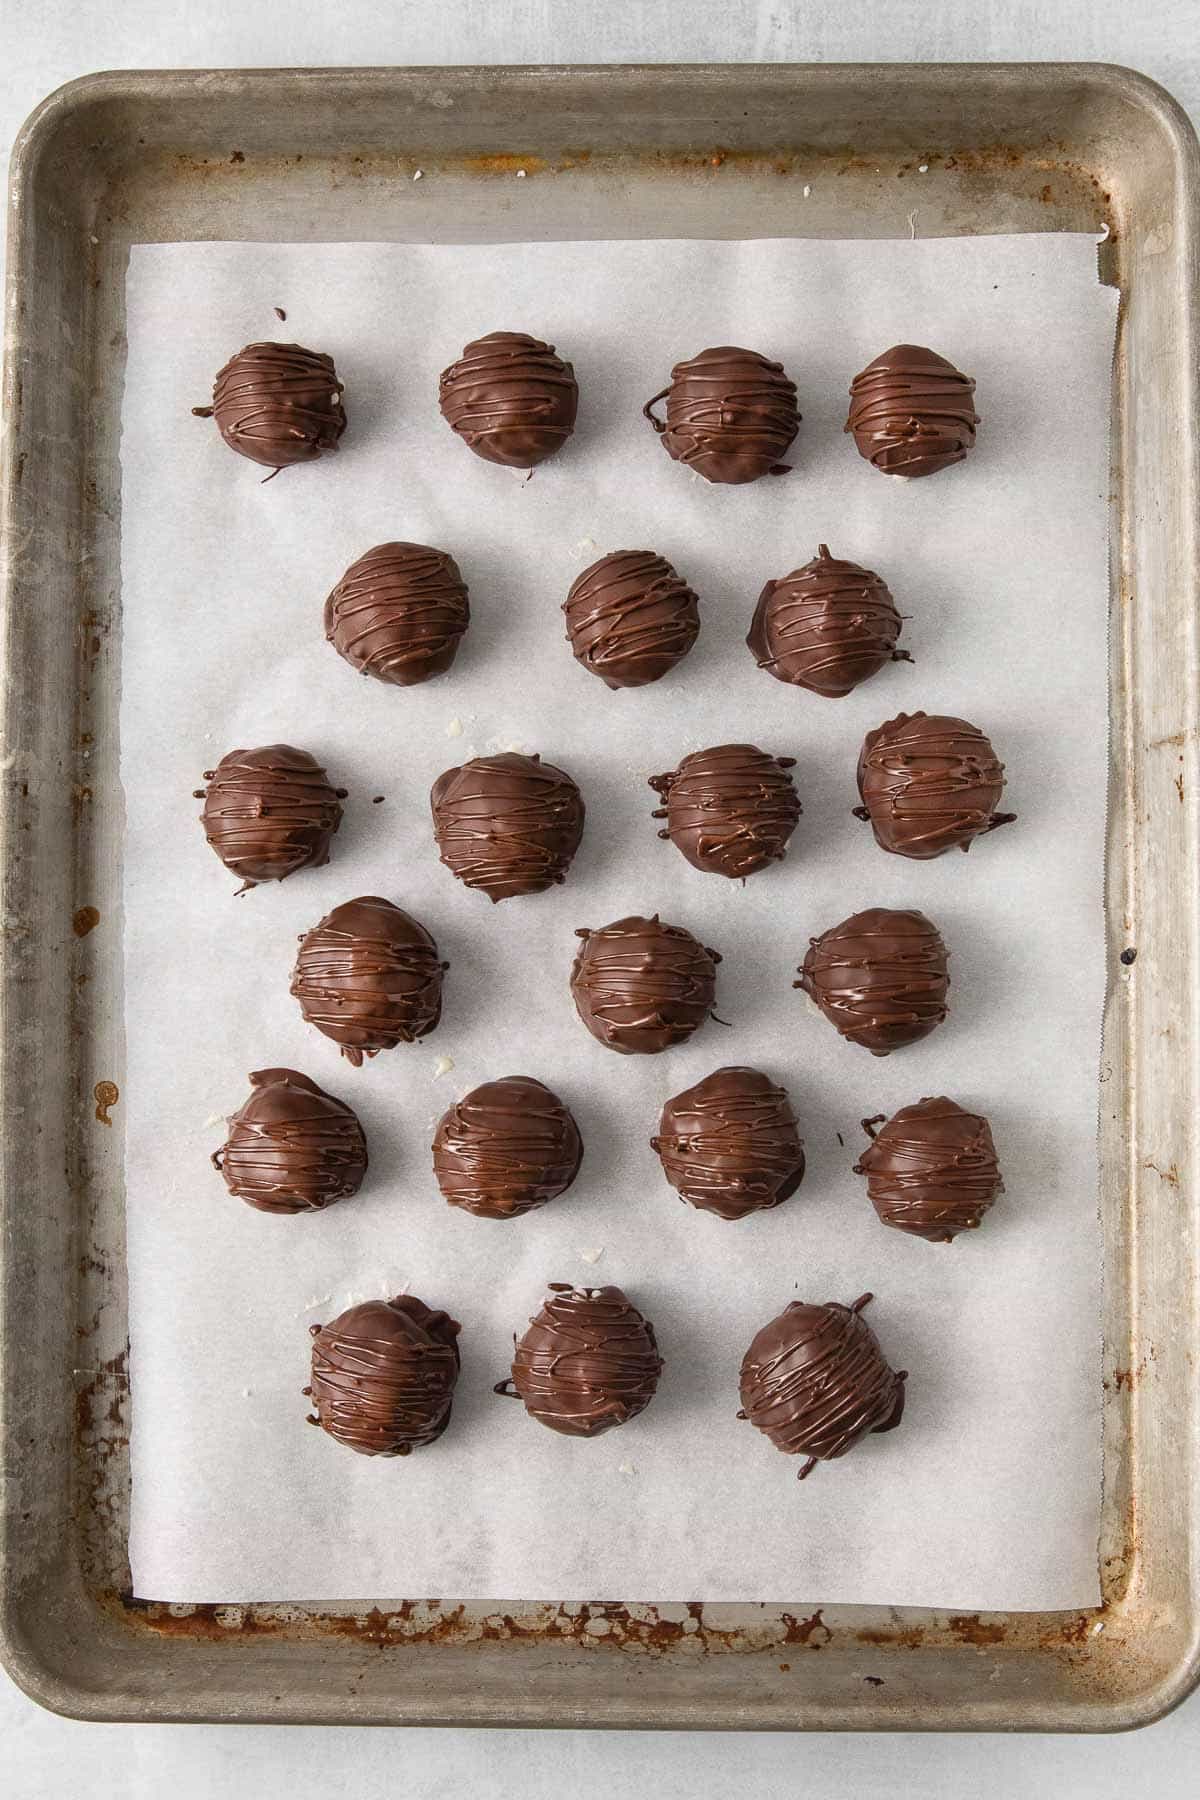 a parchment lined baking sheet with 21 chocolate covered coconut balls drizzled with extra chocolate.